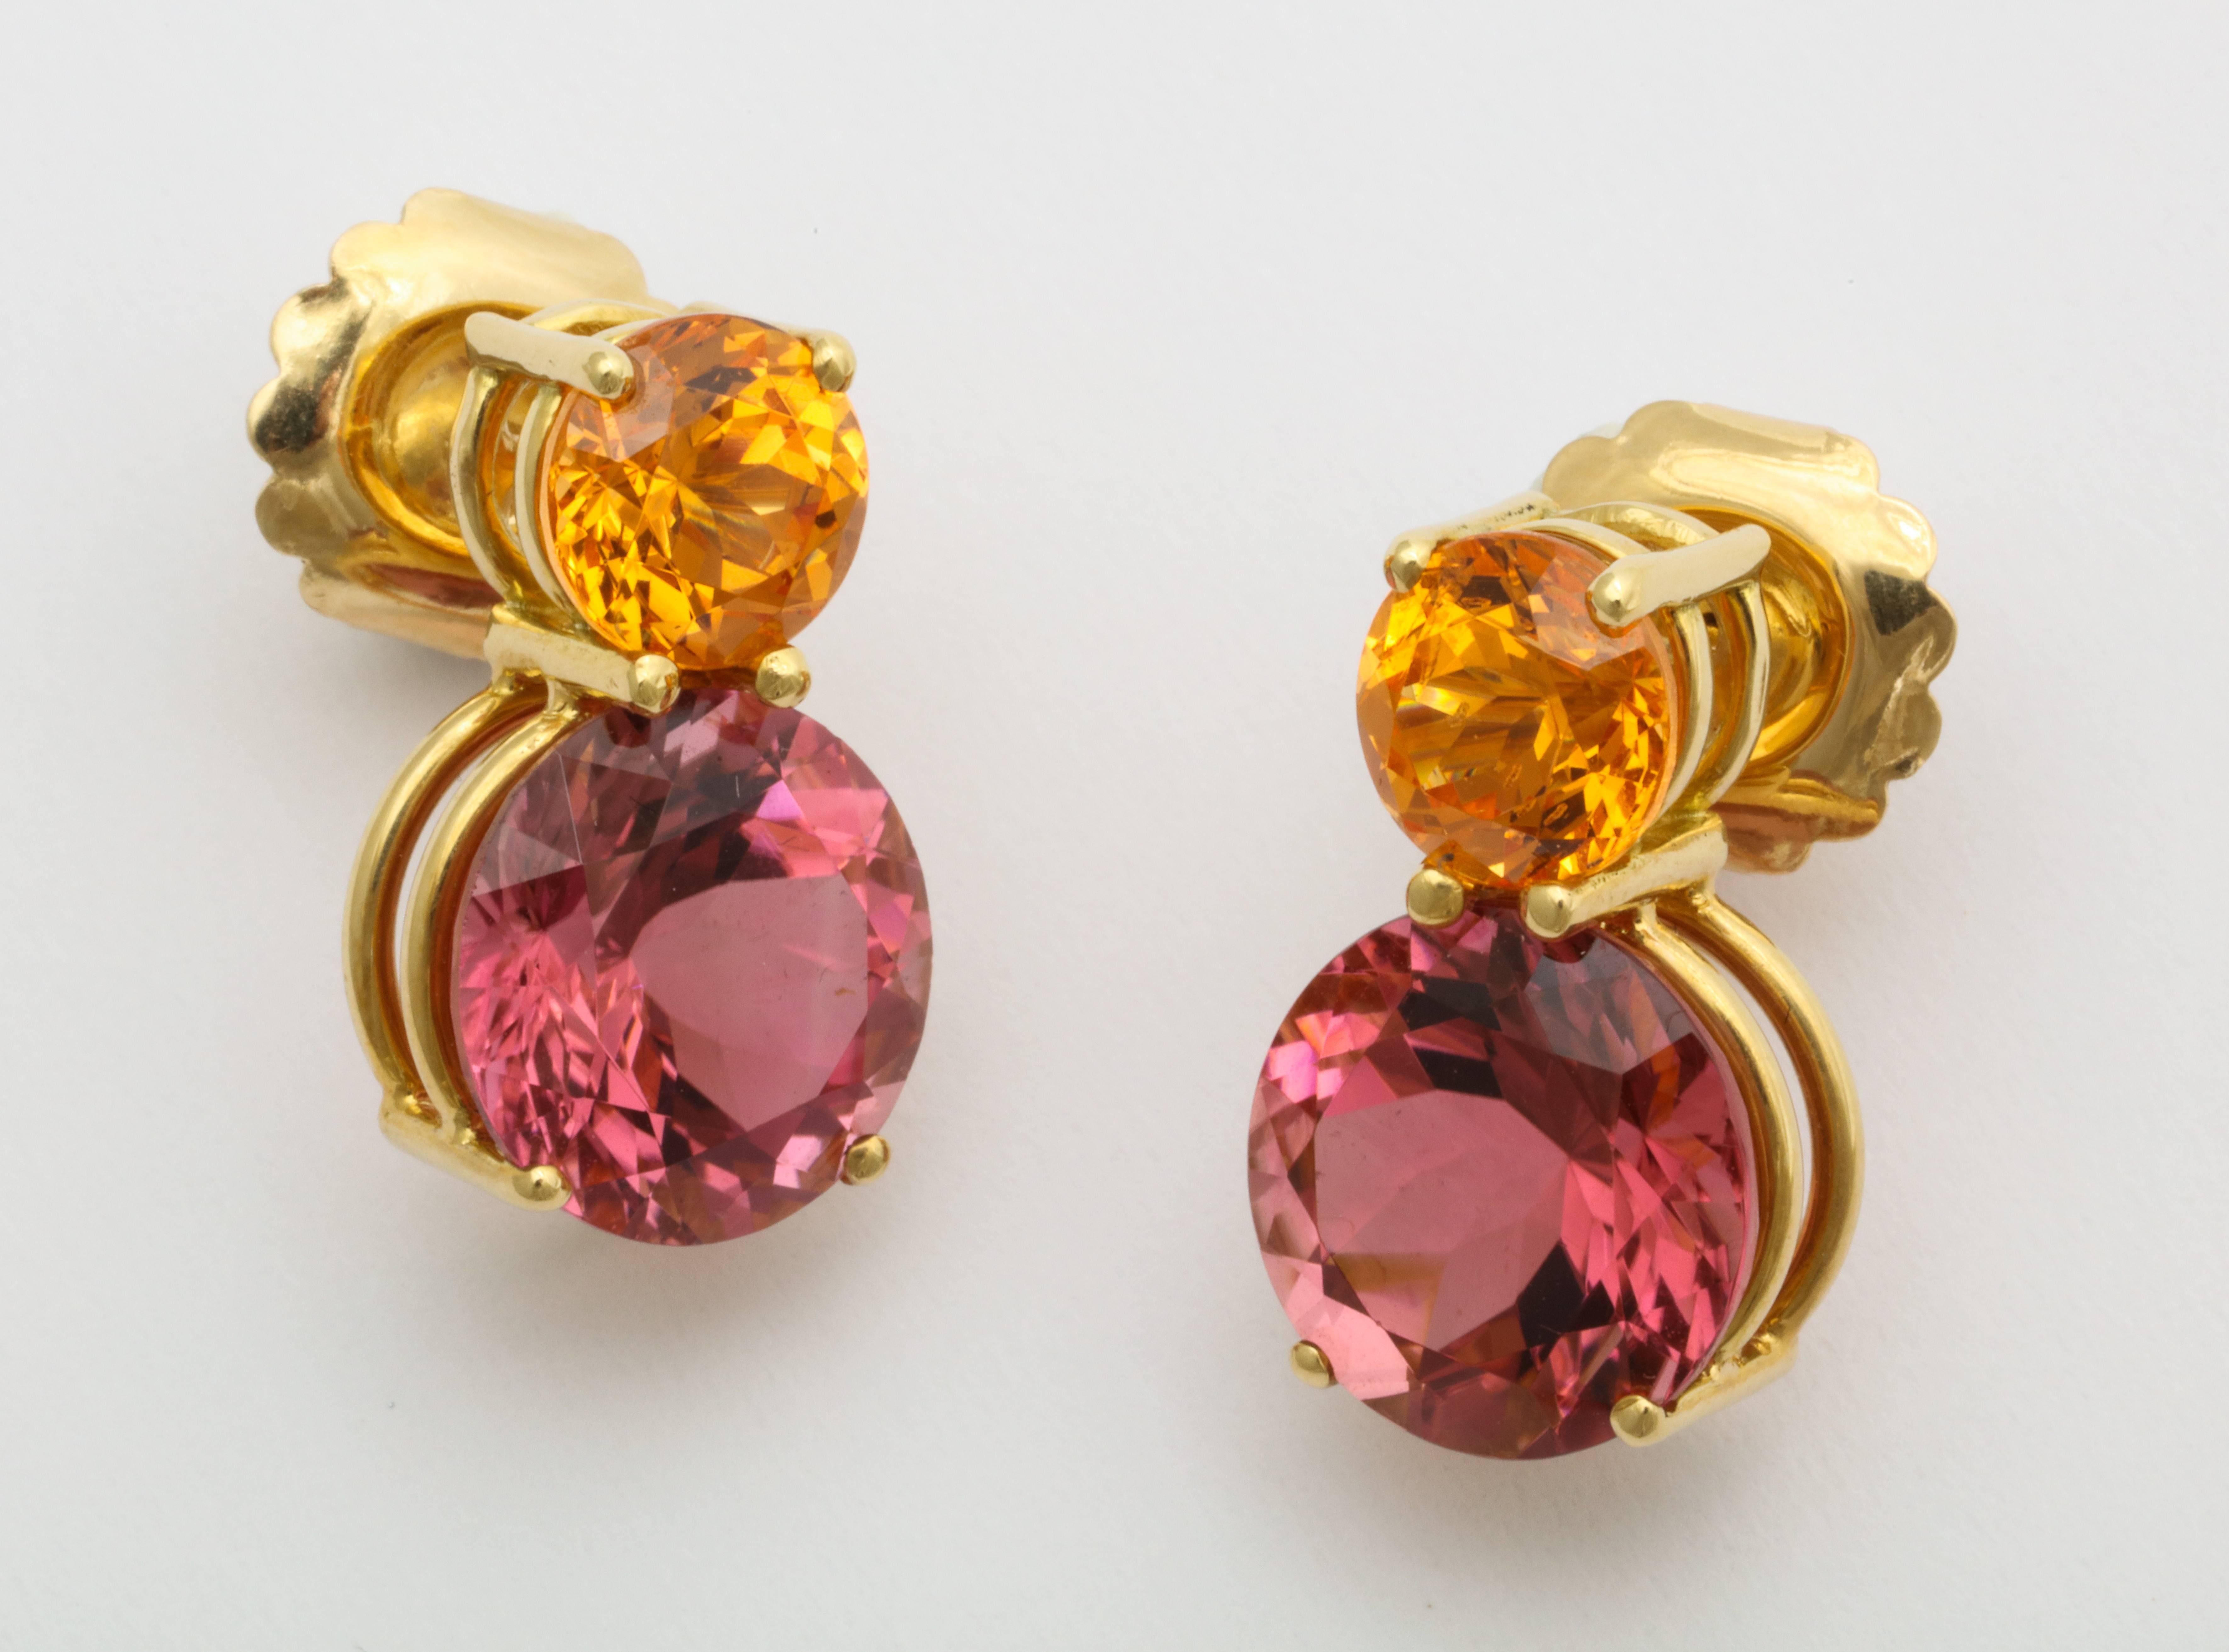 This double stud earring is the quintessential Donna Vock ear statement. Limited edition, this earring is remade only when the right color and quality material is available, for maximum warmth and brilliance.  A chic way to say 